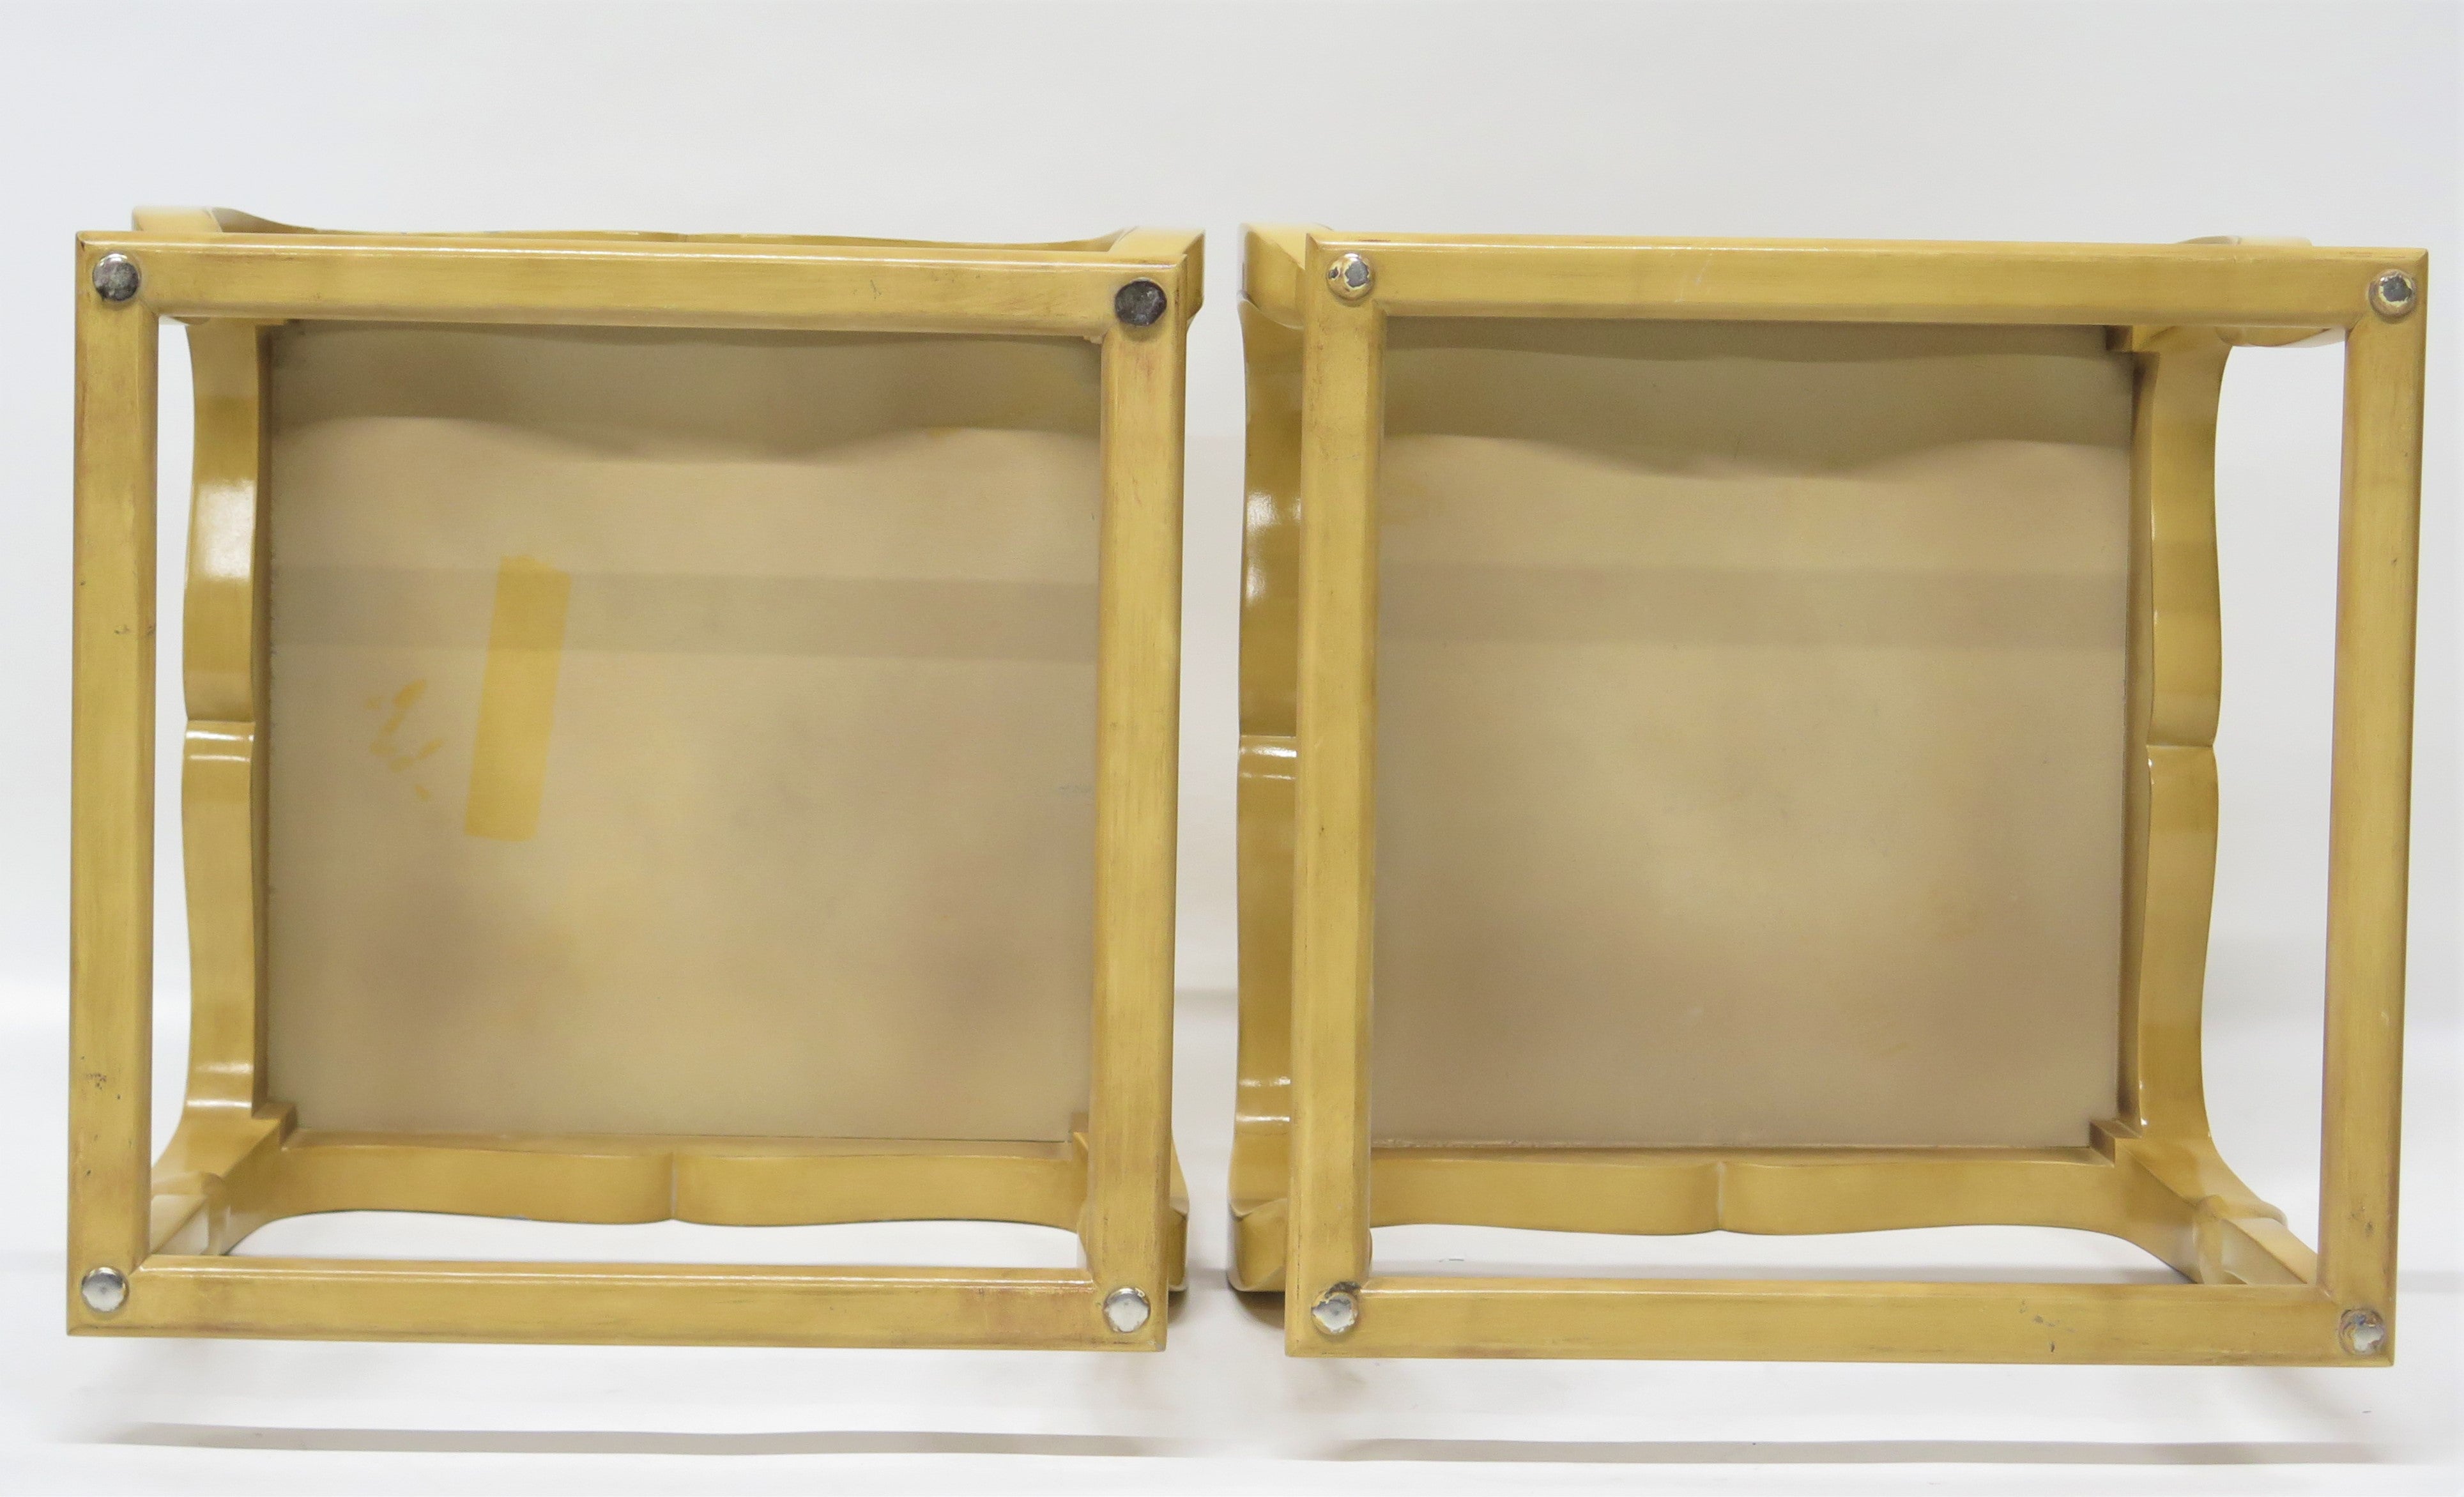 Pair of Lacquered Tables by Atelier Midavaine, Paris